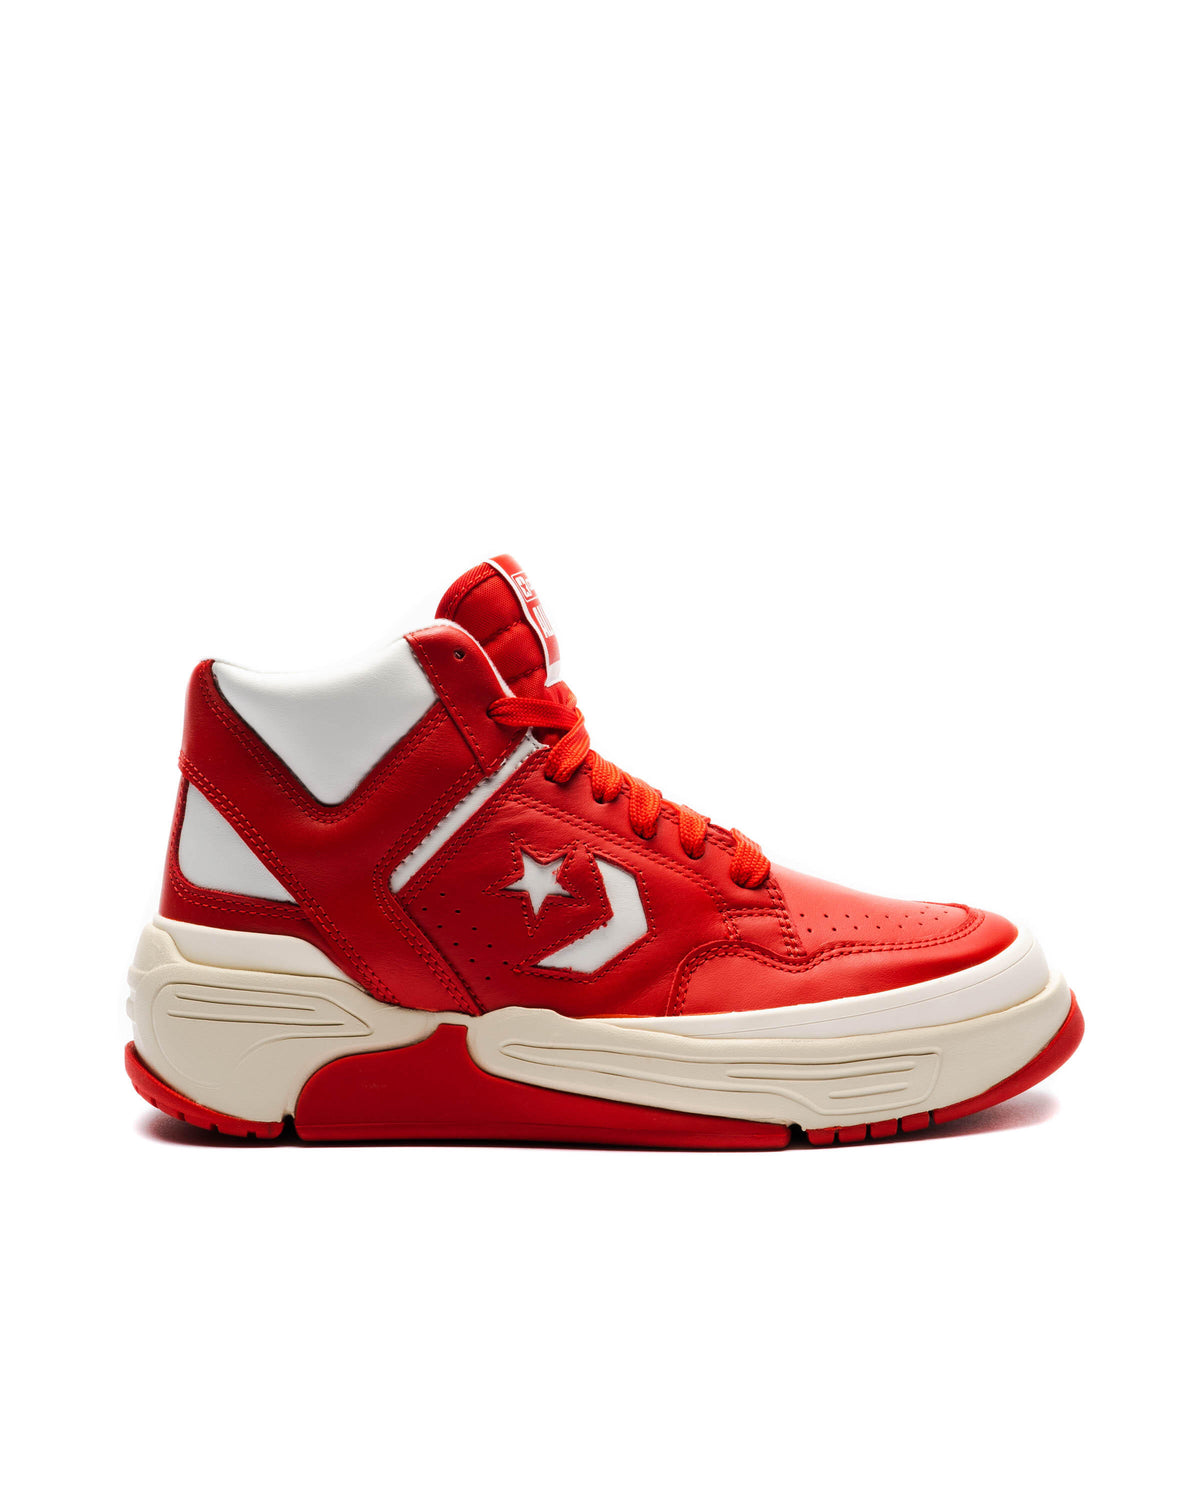 Converse WEAPON CX MID Loyalty Red